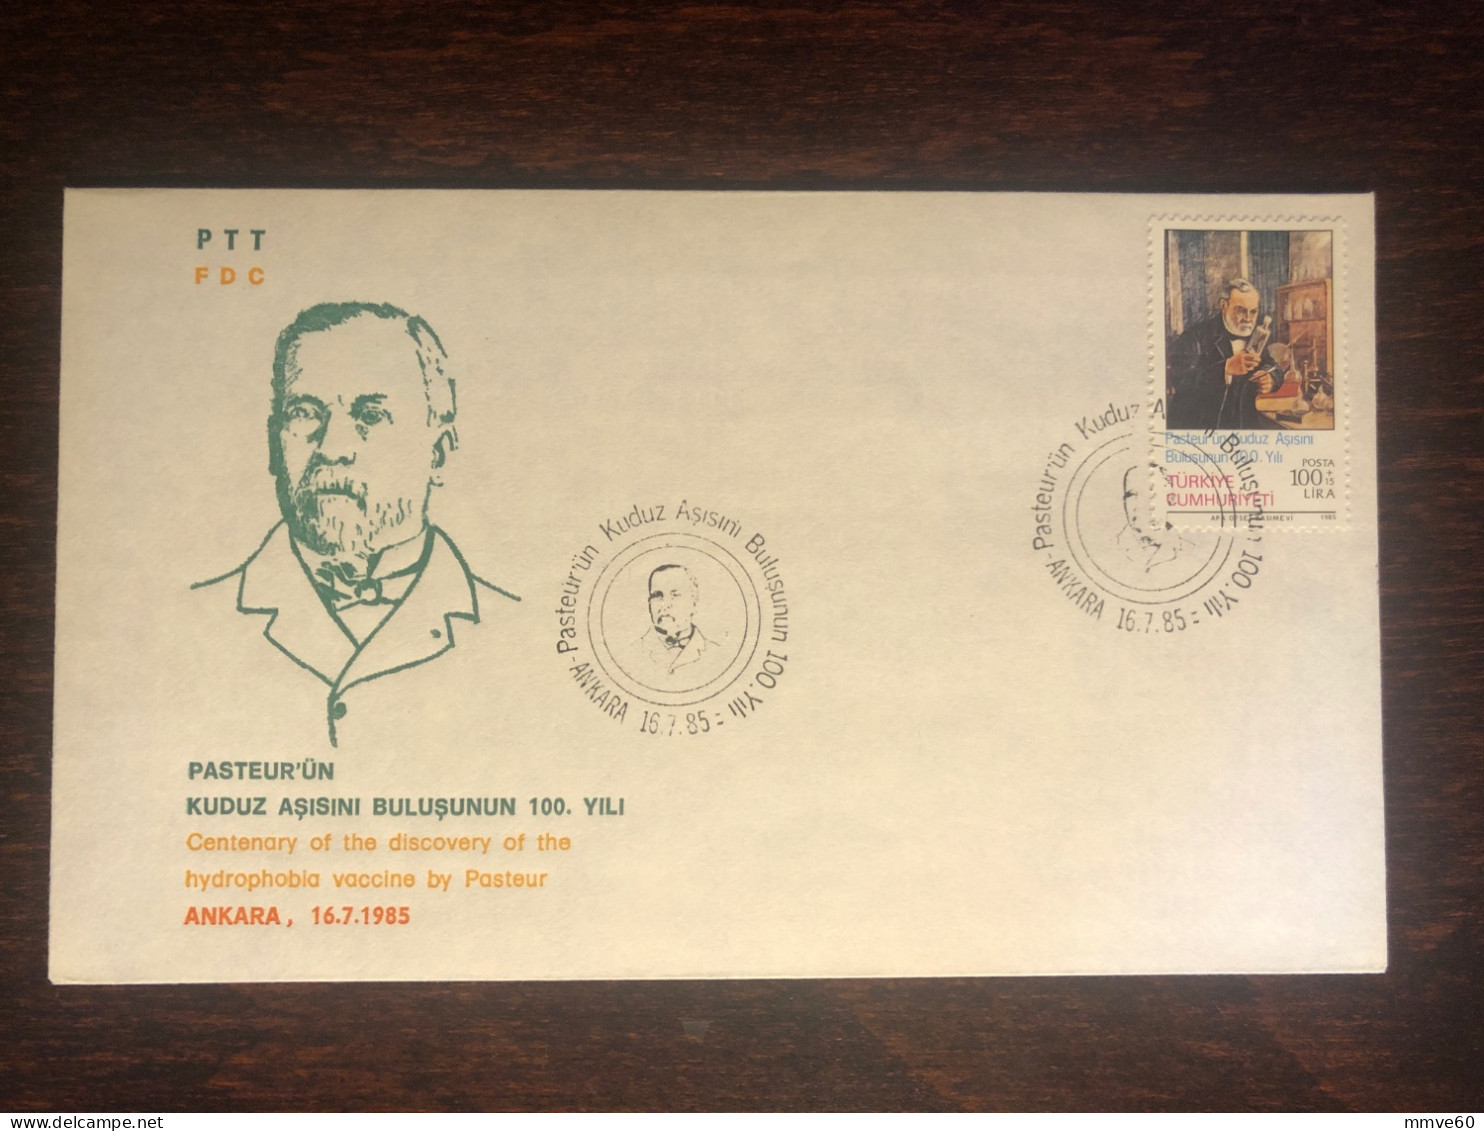 TURKEY FDC COVER 1985 YEAR PASTEUR HEALTH MEDICINE STAMPS - FDC